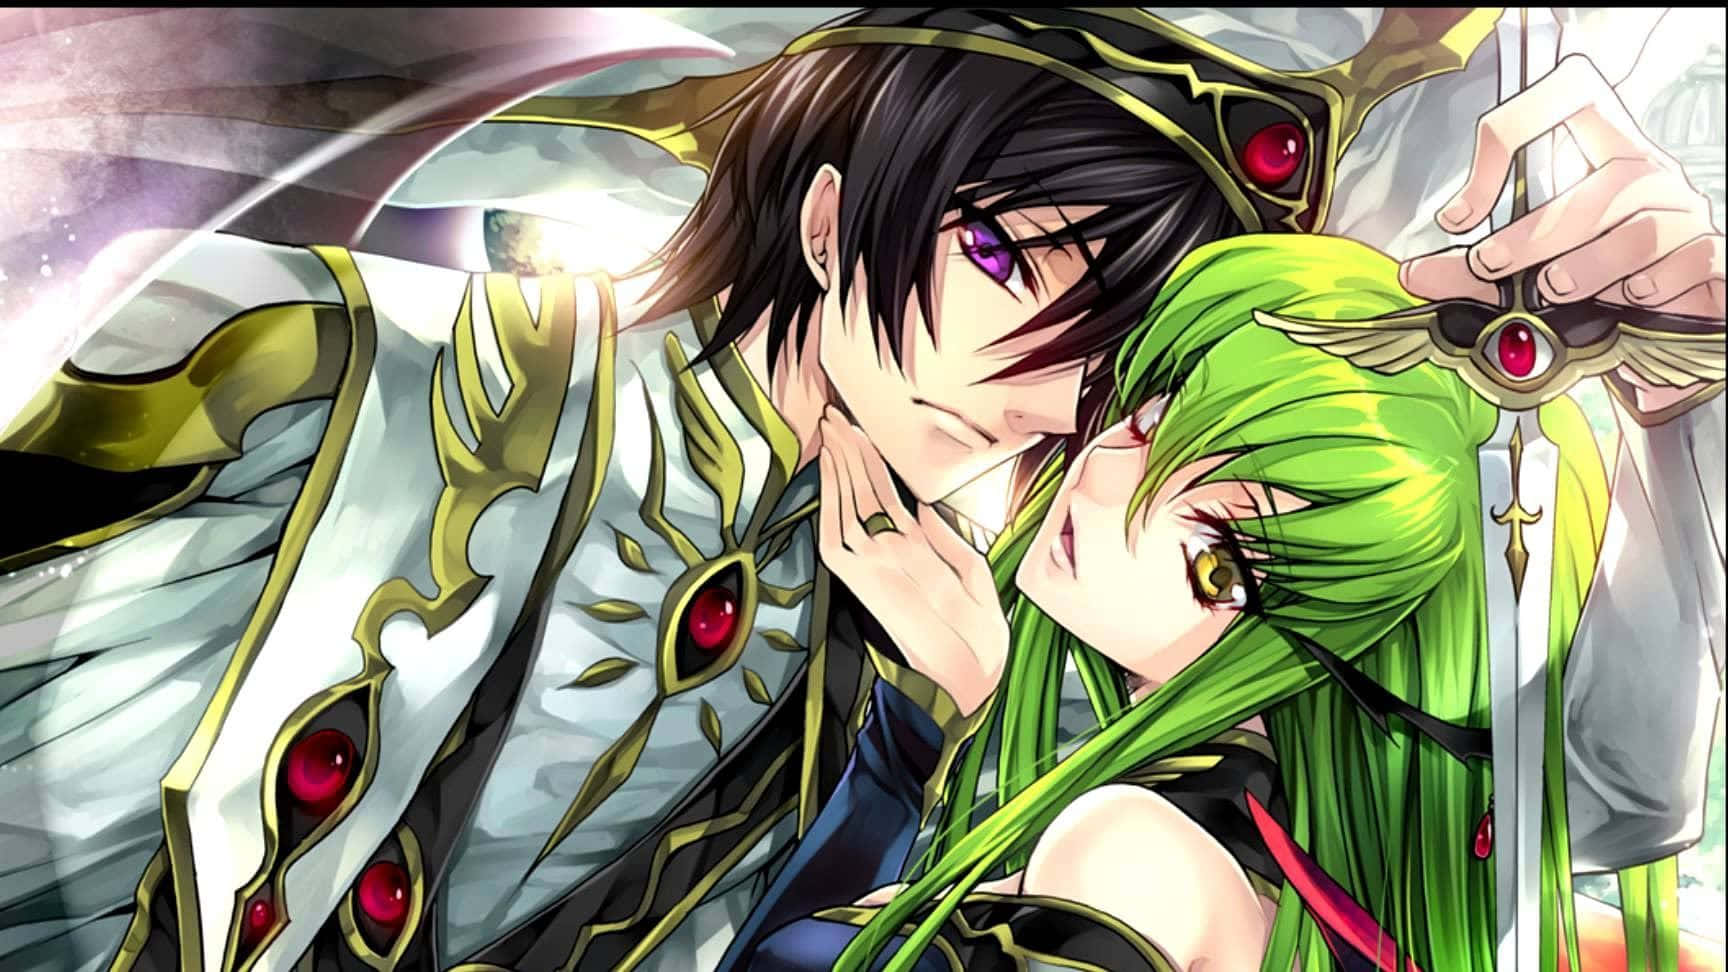 How to Draw Lelouch Lamperouge, Code Geass, Anime Manga